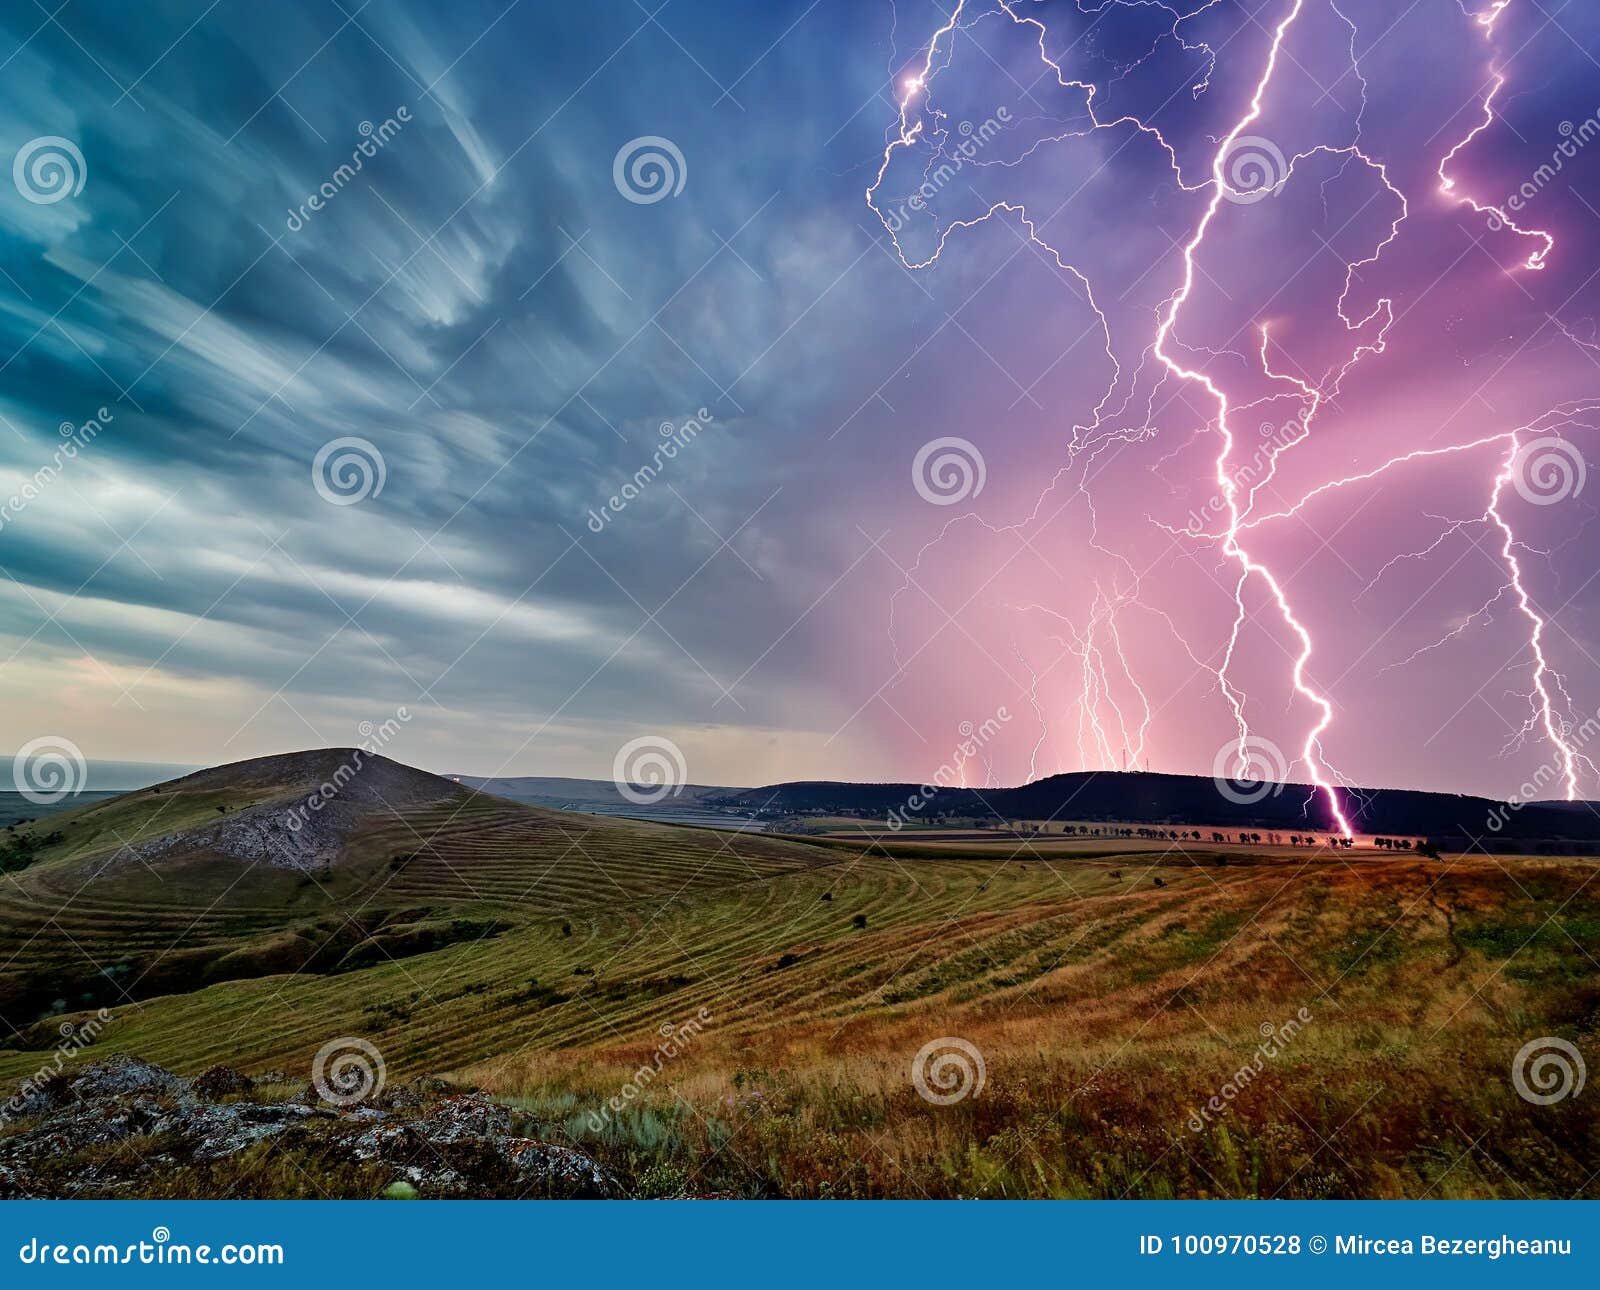 thunderstorm with lightnings over the fields